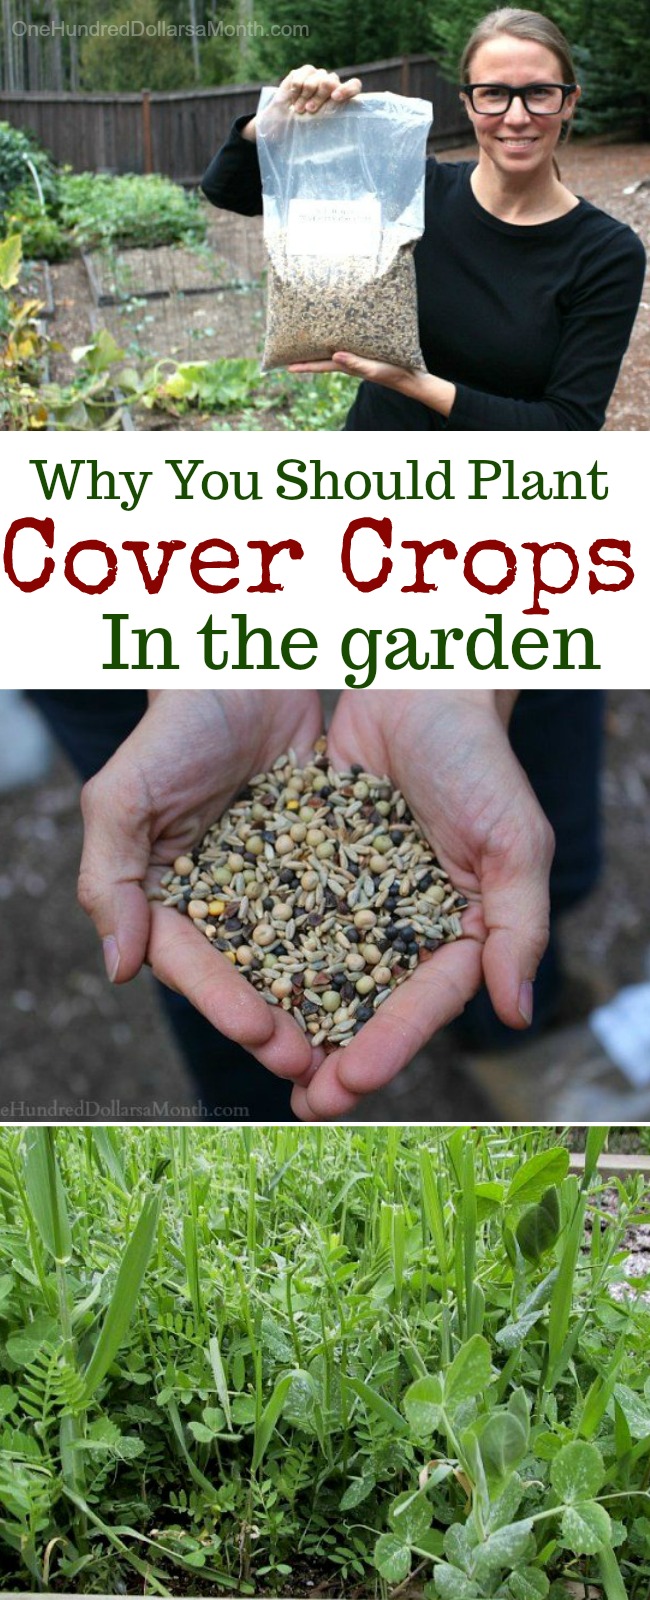 It’s Time to Get Your Cover Crops Planted